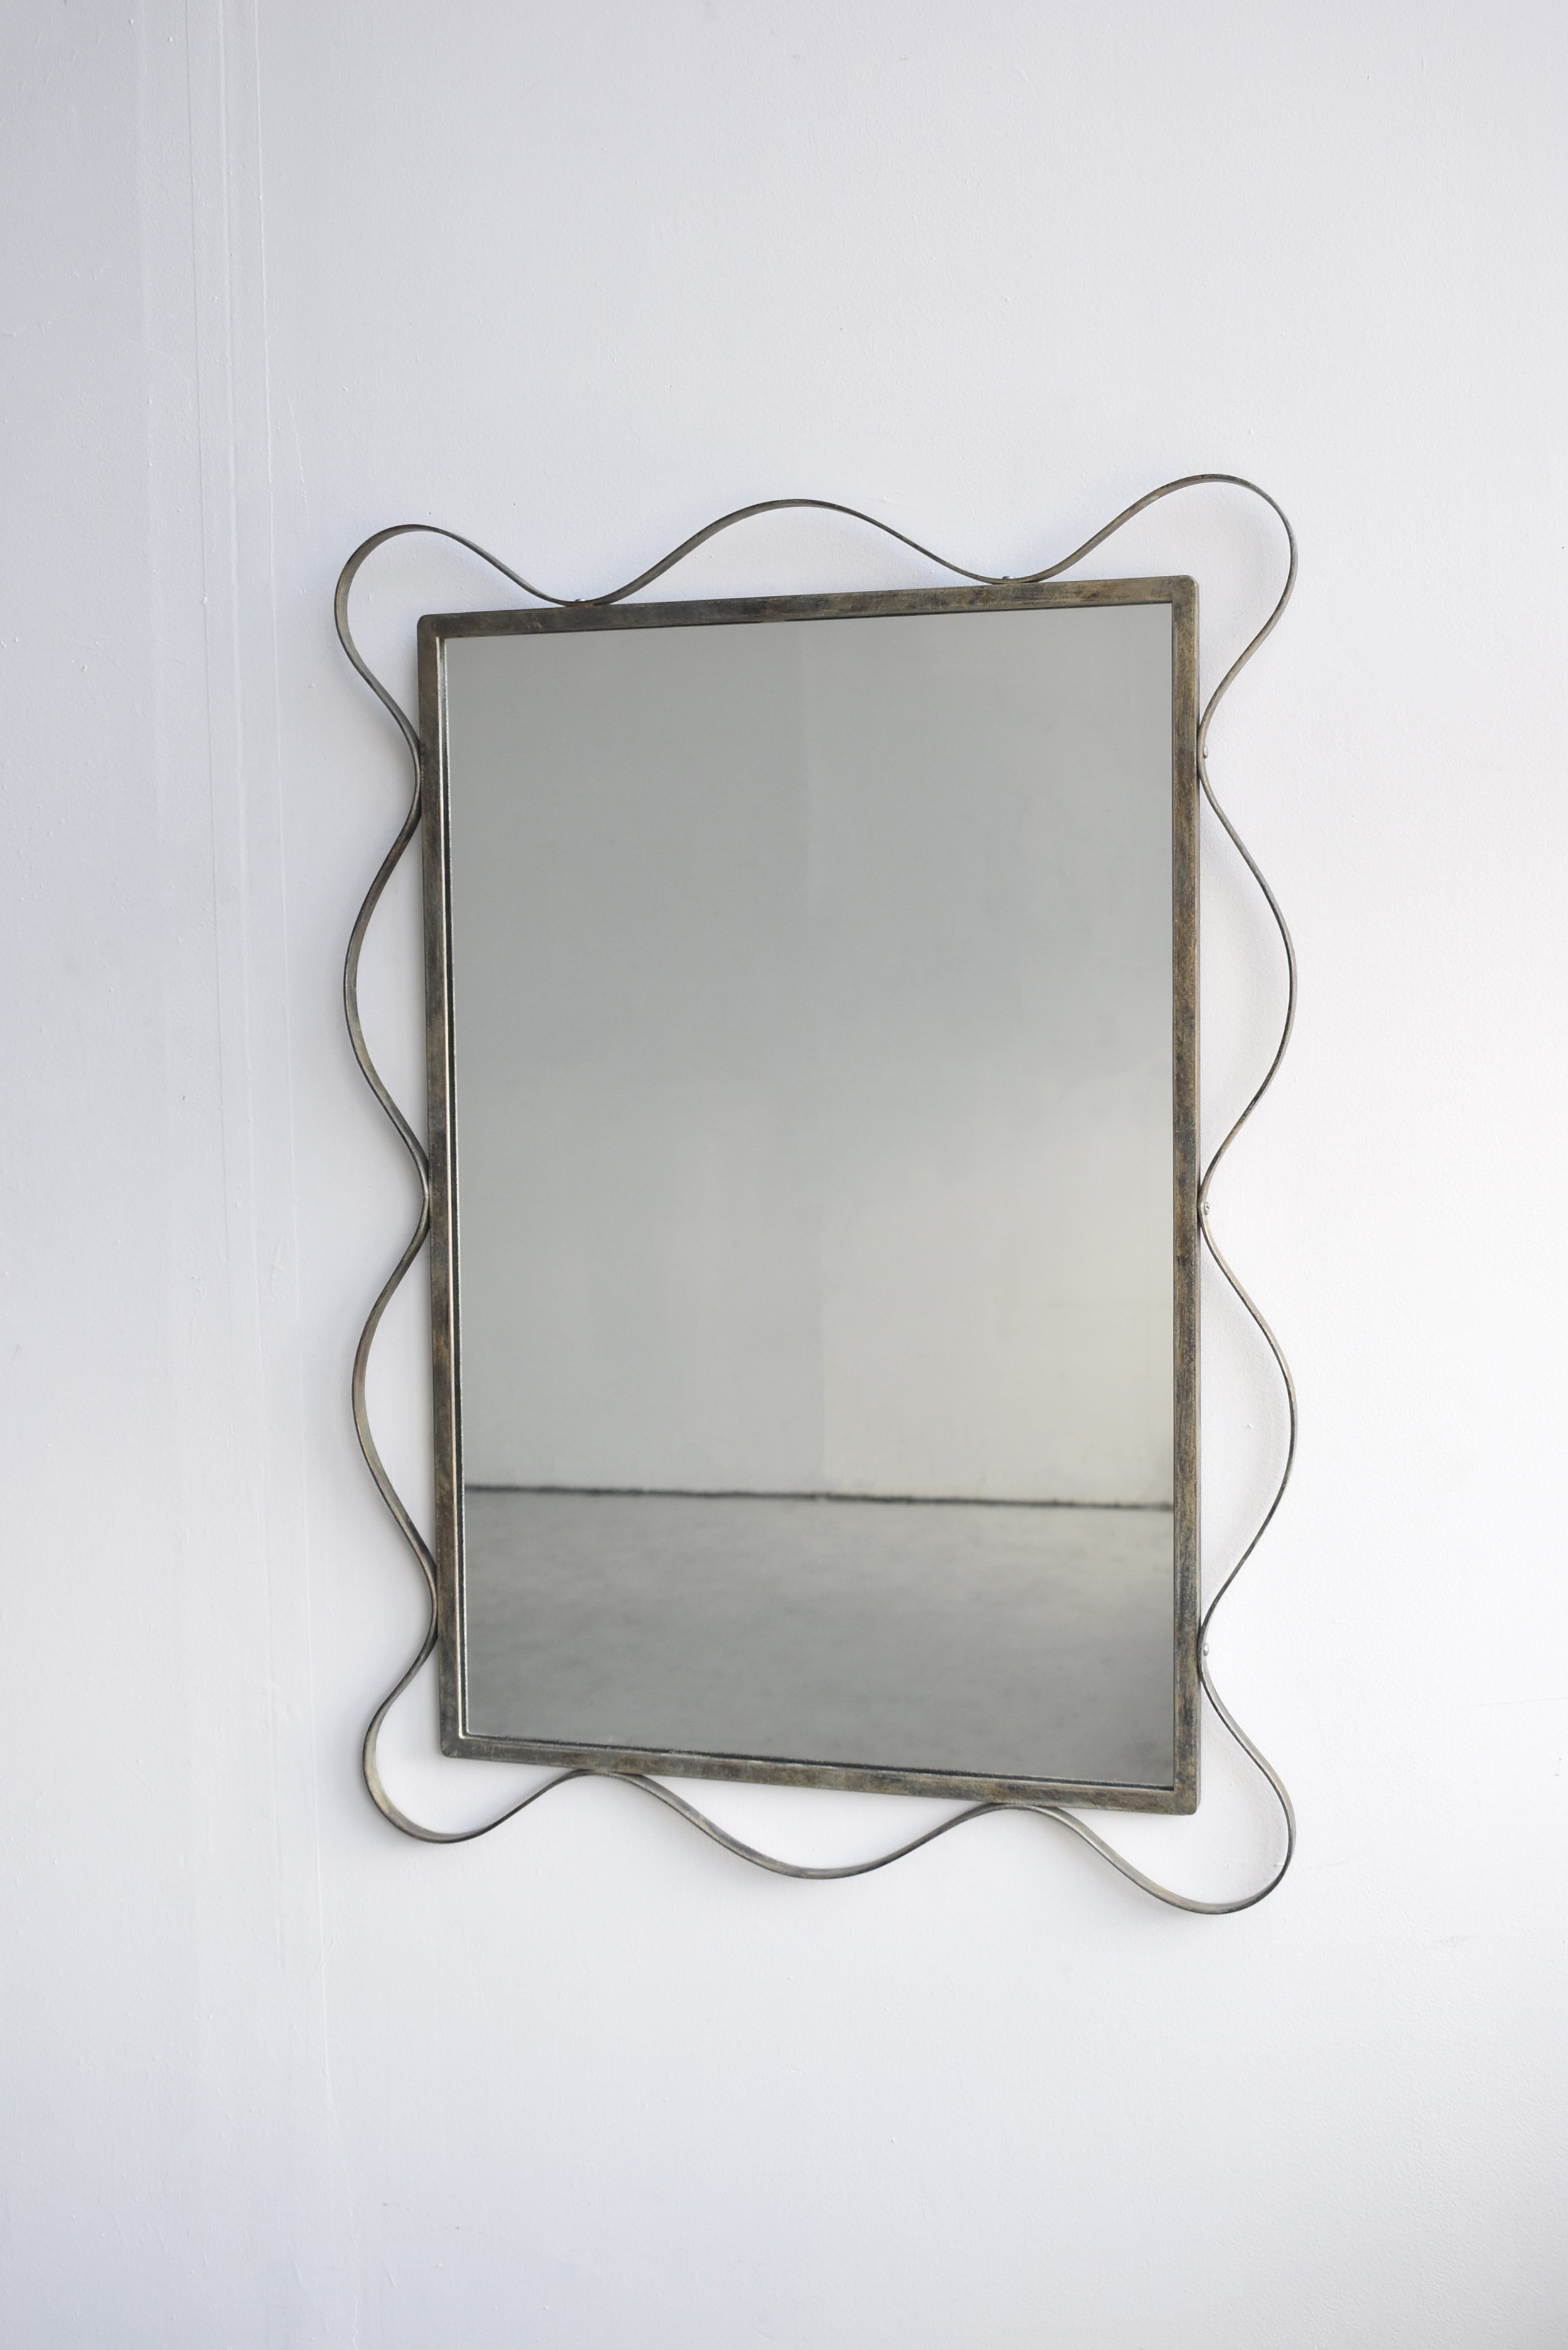 Black Round Mirrors for sale in New York, New York